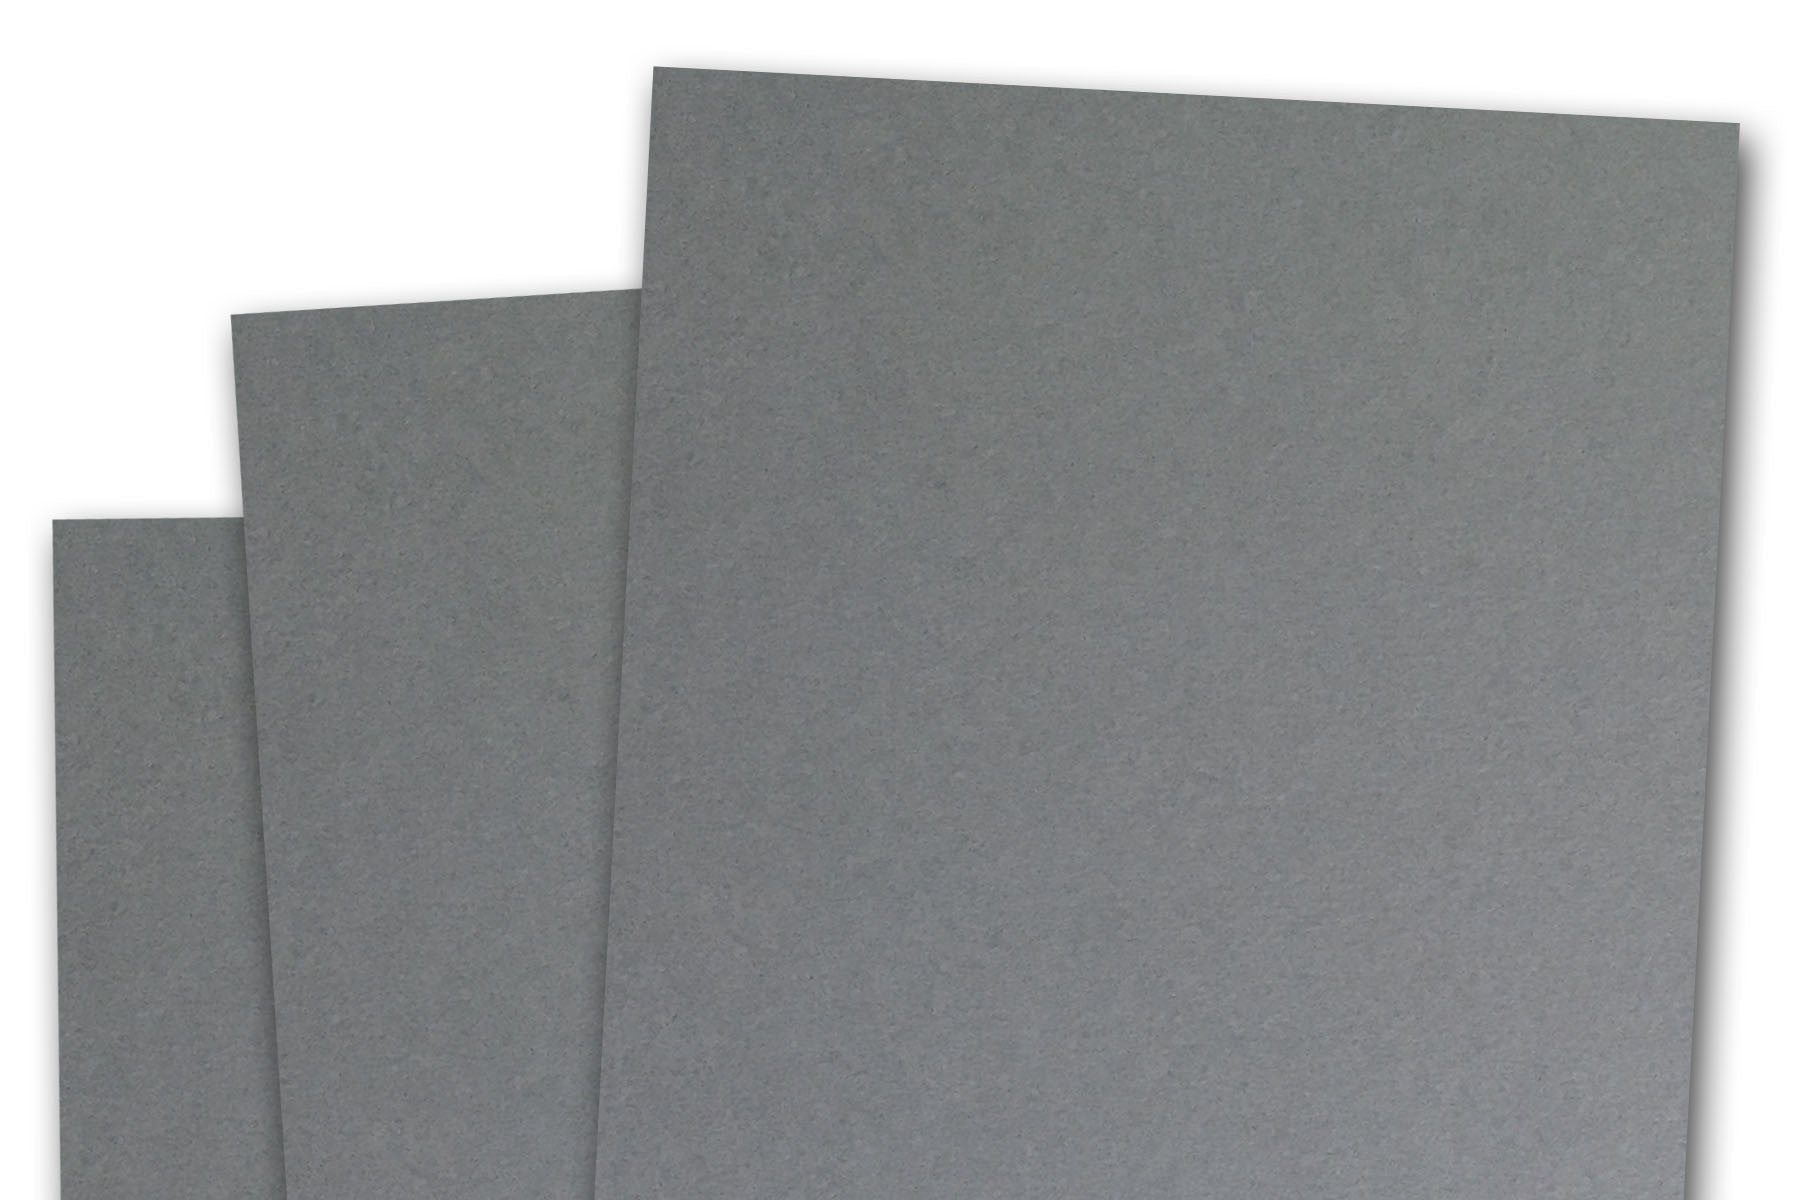 Steel Grey Paper (Dur-O-Tone, Text Weight)